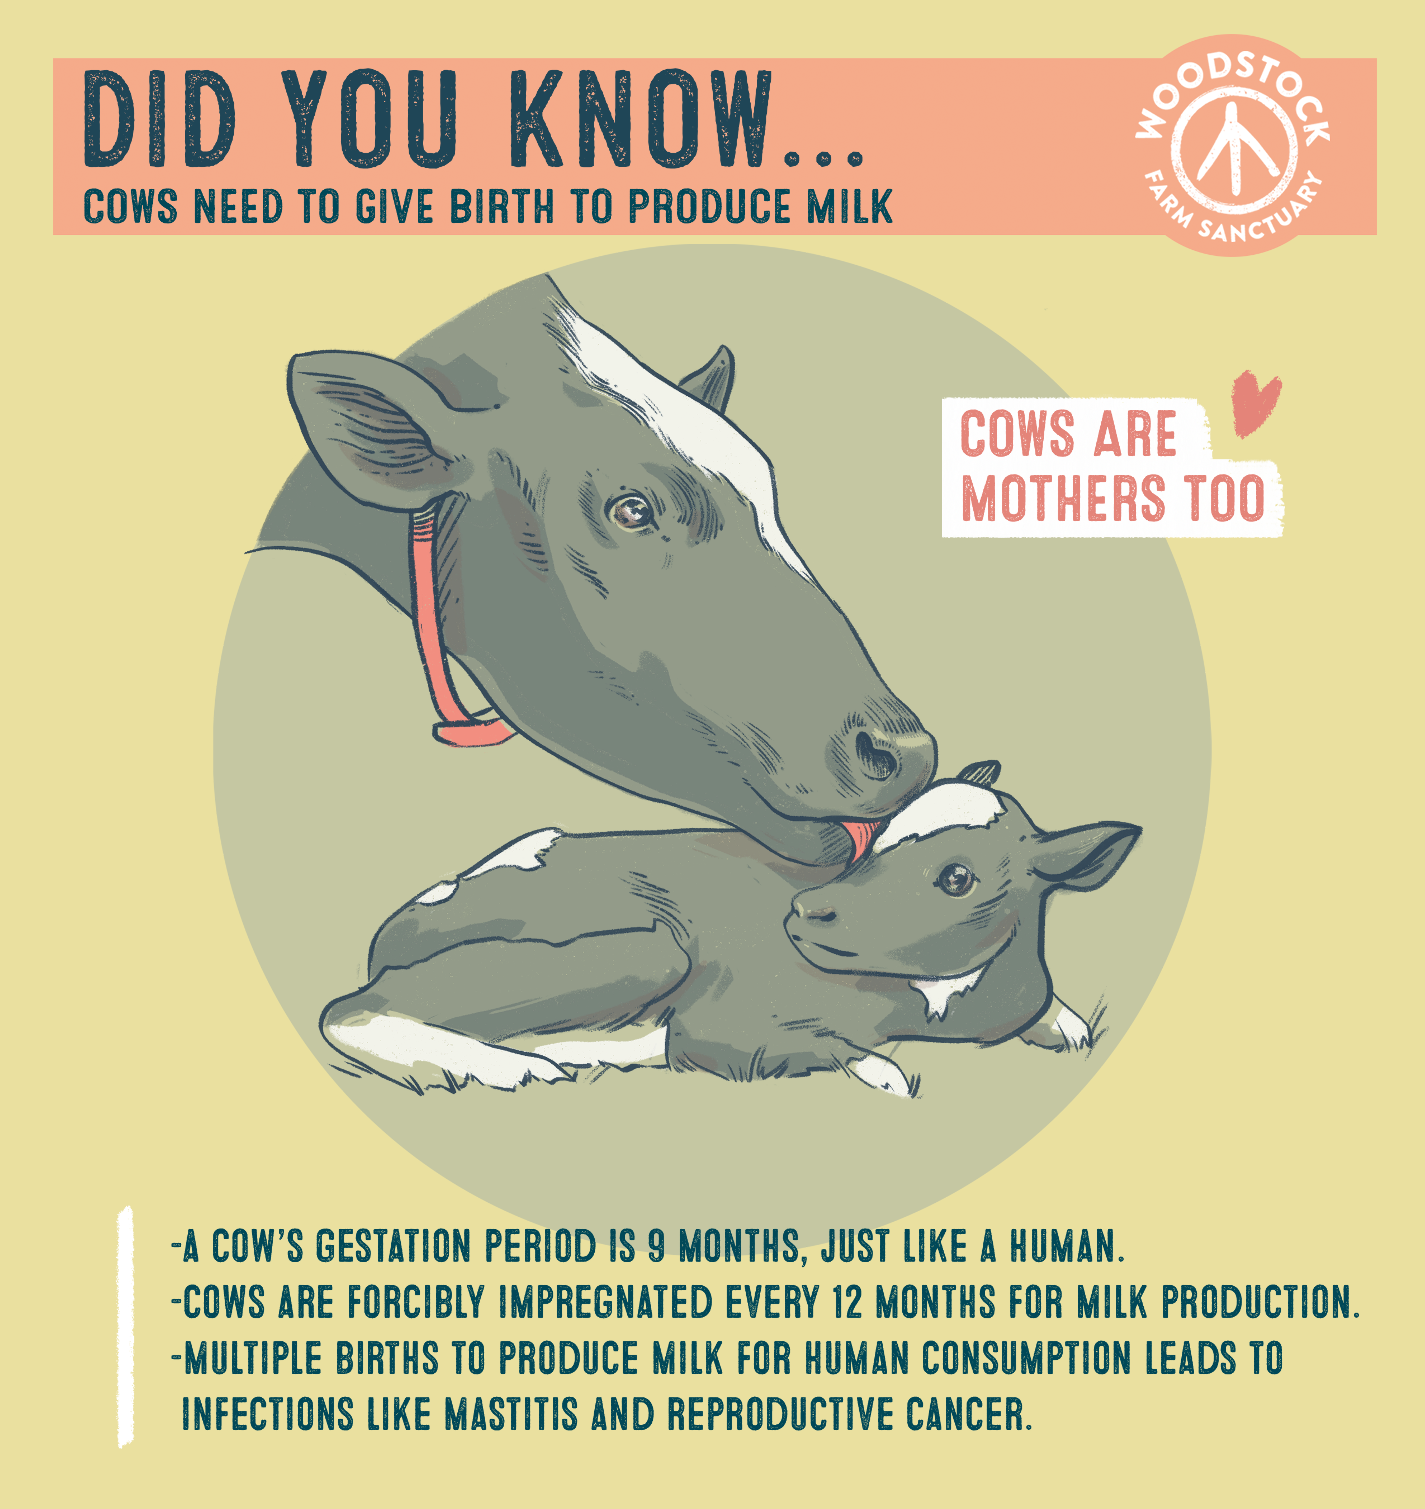 Did you know... Cows need to give birth to produce milk. Cows are mothers too. A cow’s gestation period is 9 months, just like a human. Cows are forcibly impregnated every 12 months for milk production. Multiple births to produce milk for human consumption leads to infections like mastitis and reproductive cancer.